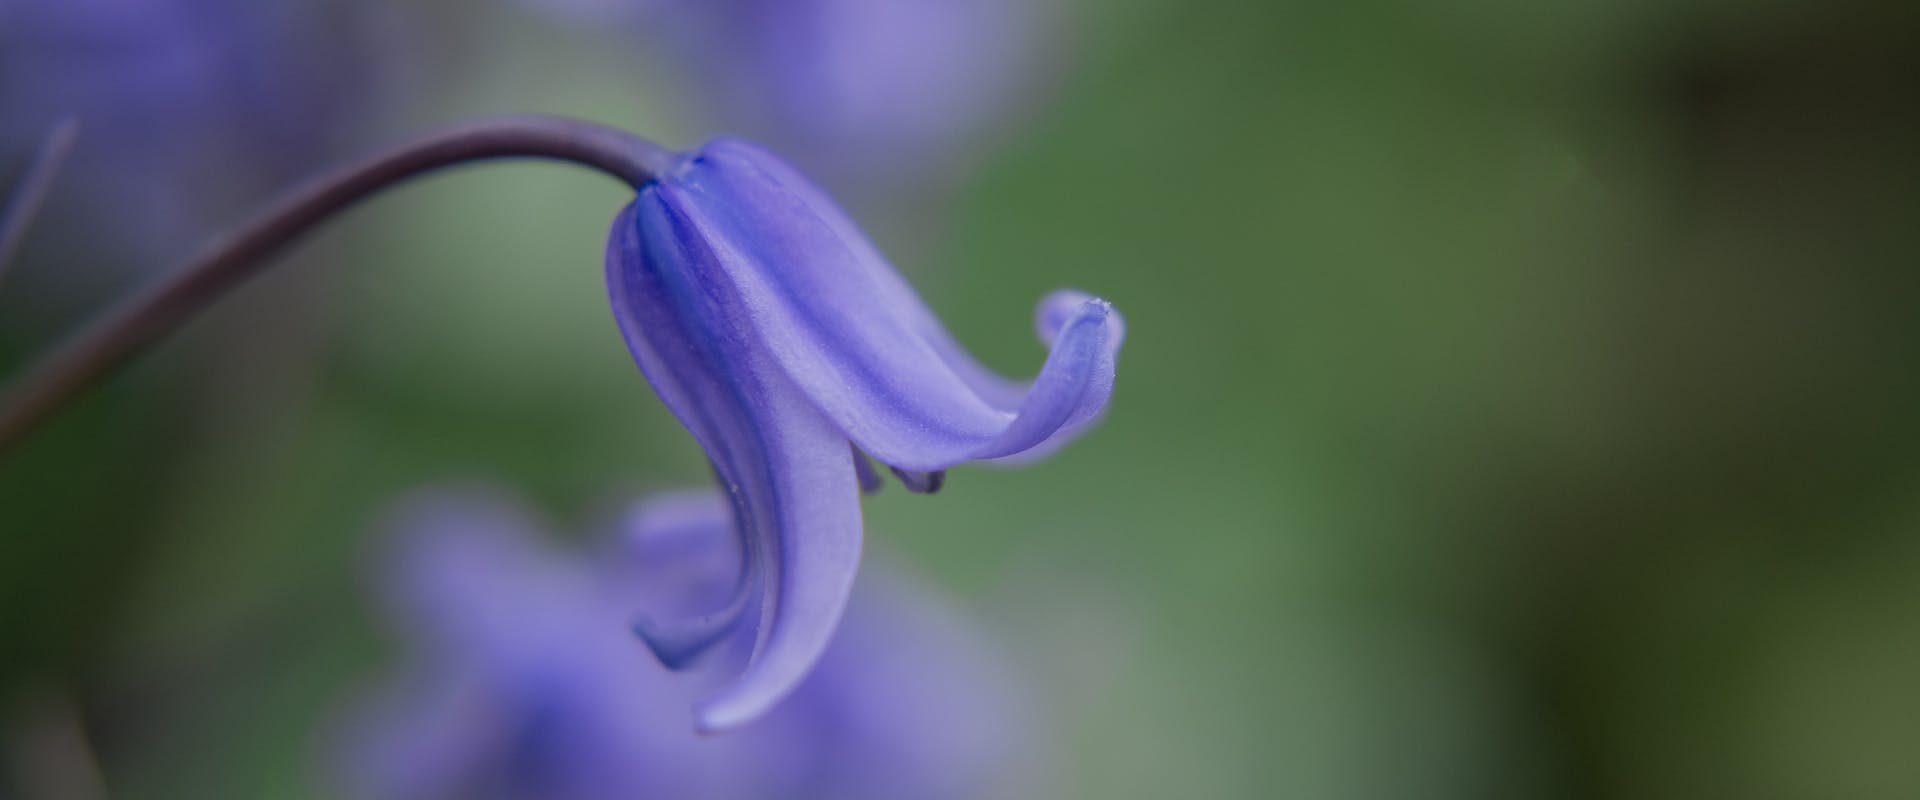 a close up of a single bluebell flower